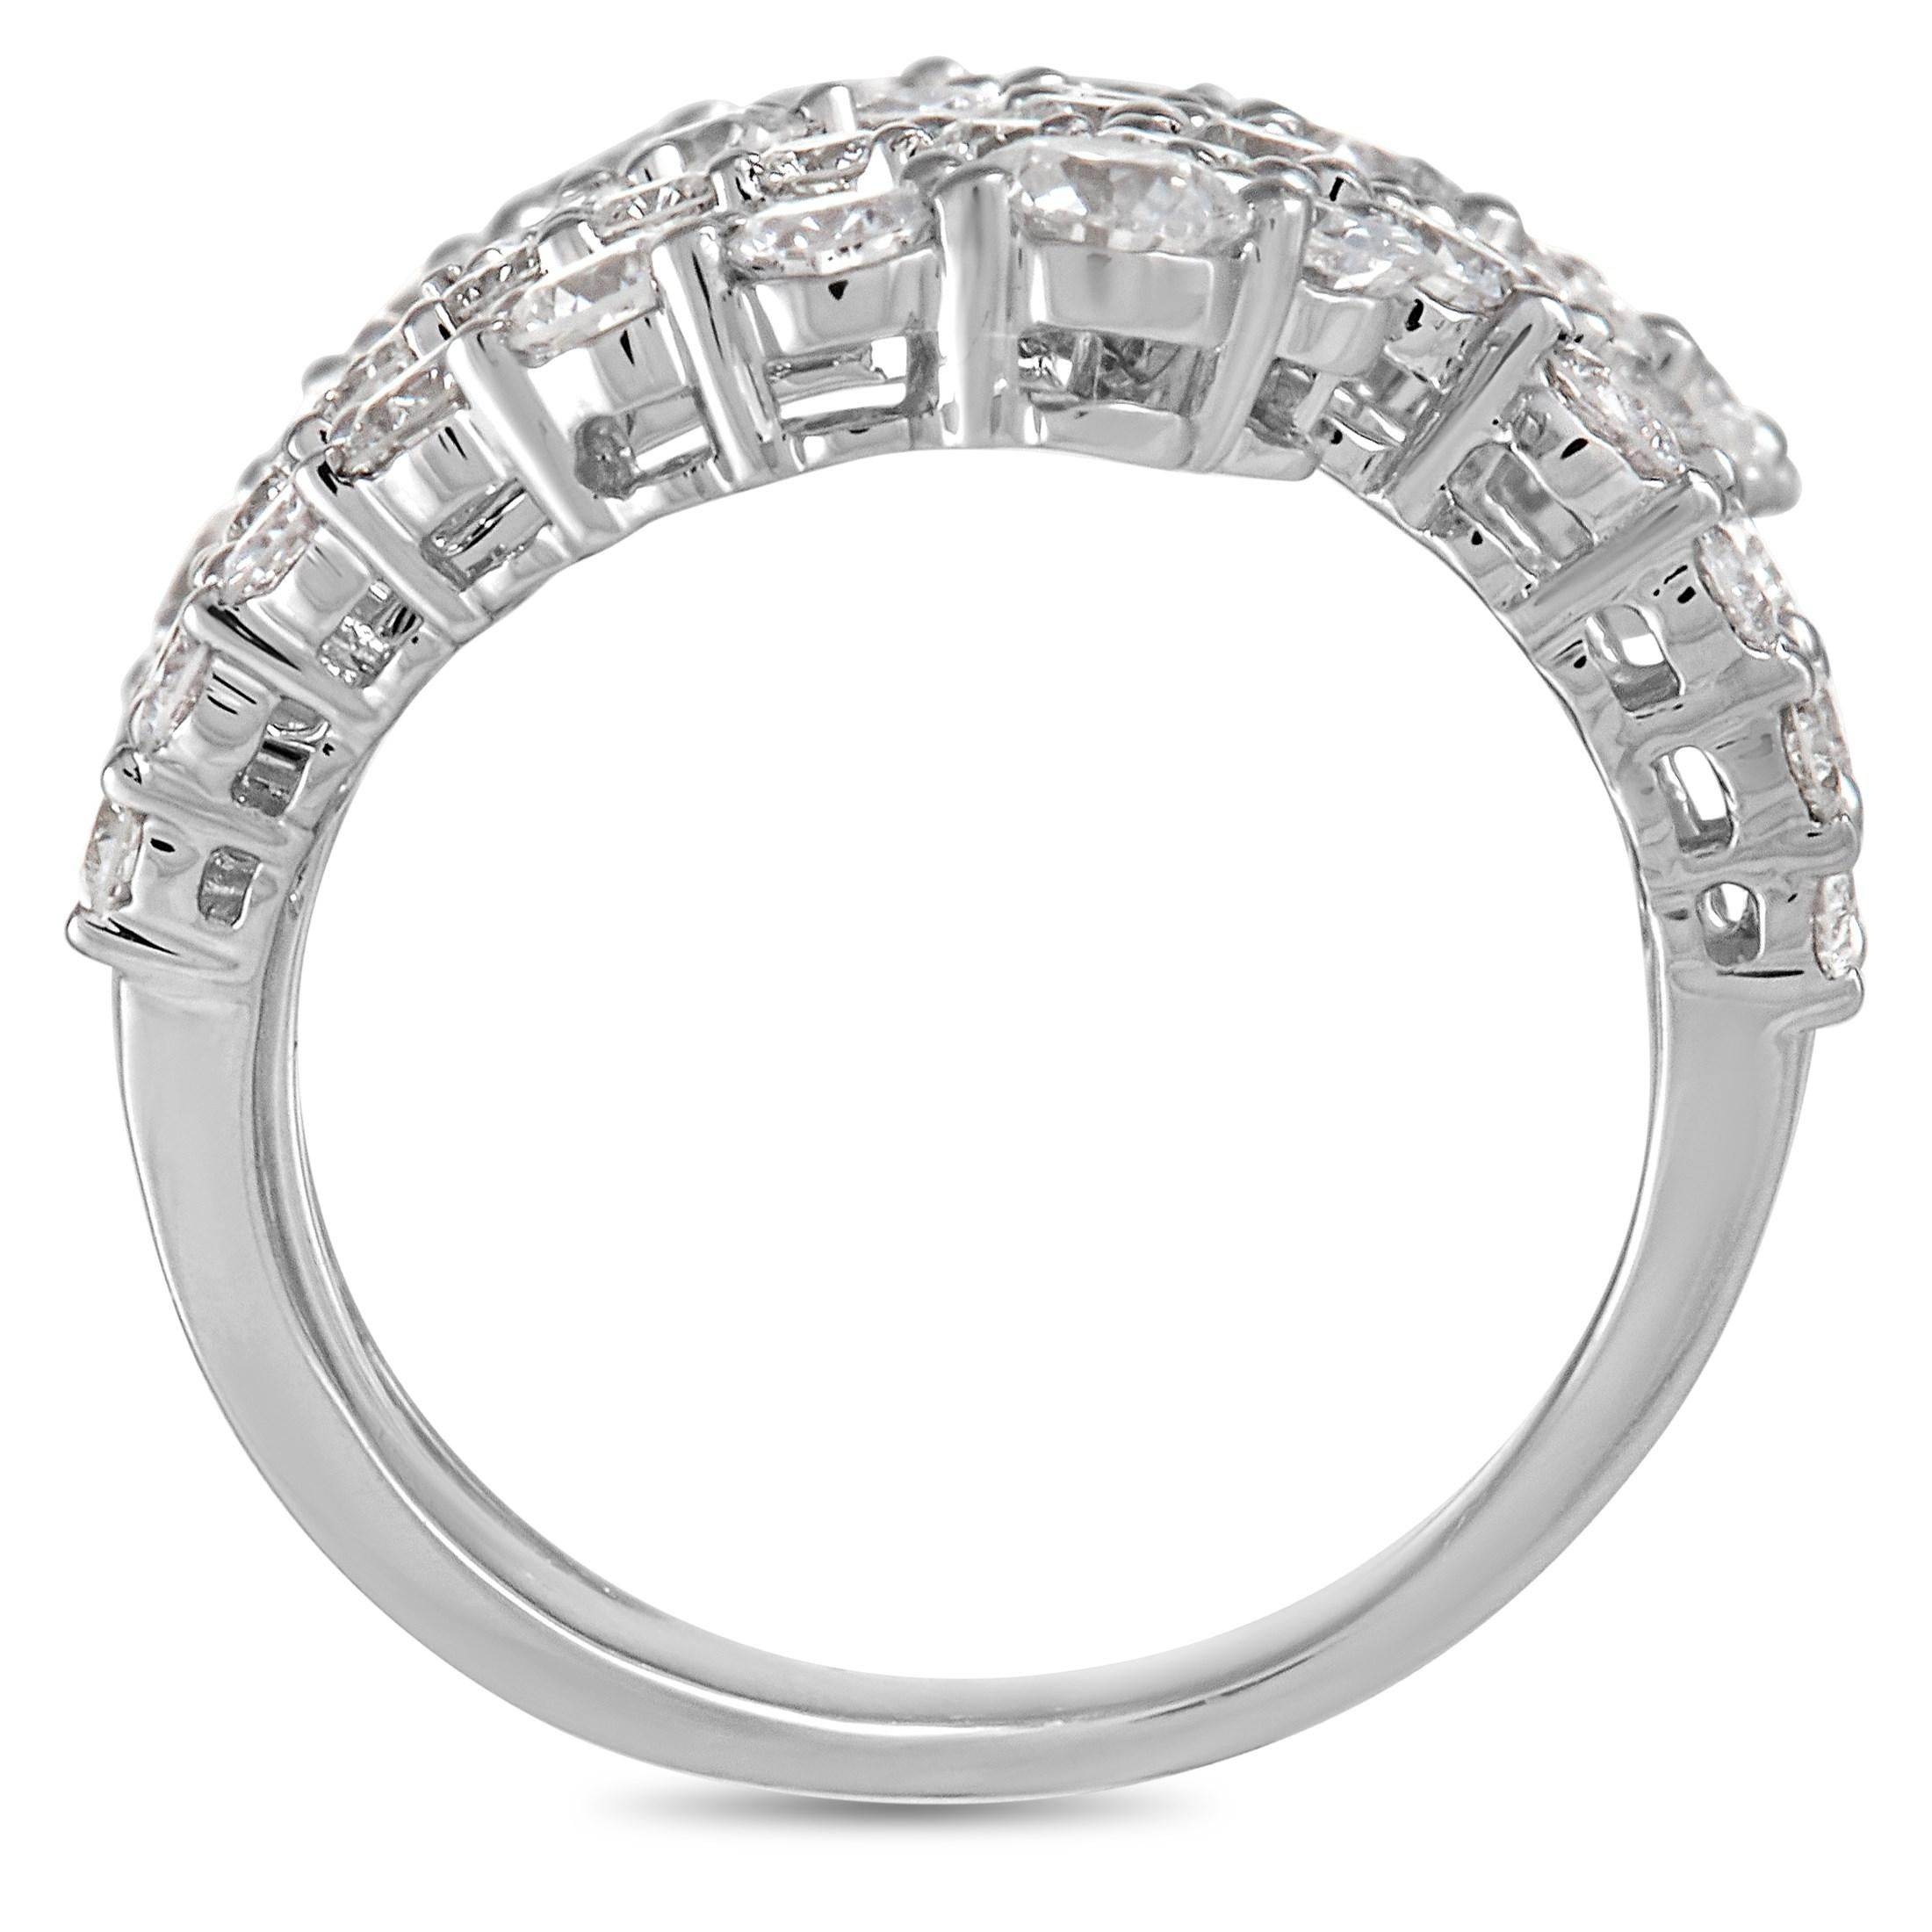 A stunning, curved setting made from 18K White Gold makes this luxury ring simply unforgettable. Adorned with 5.0 carats of sparkling diamonds, this artistic accessory features a 10mm wide band and a top height measuring 3mm.

This jewelry piece is